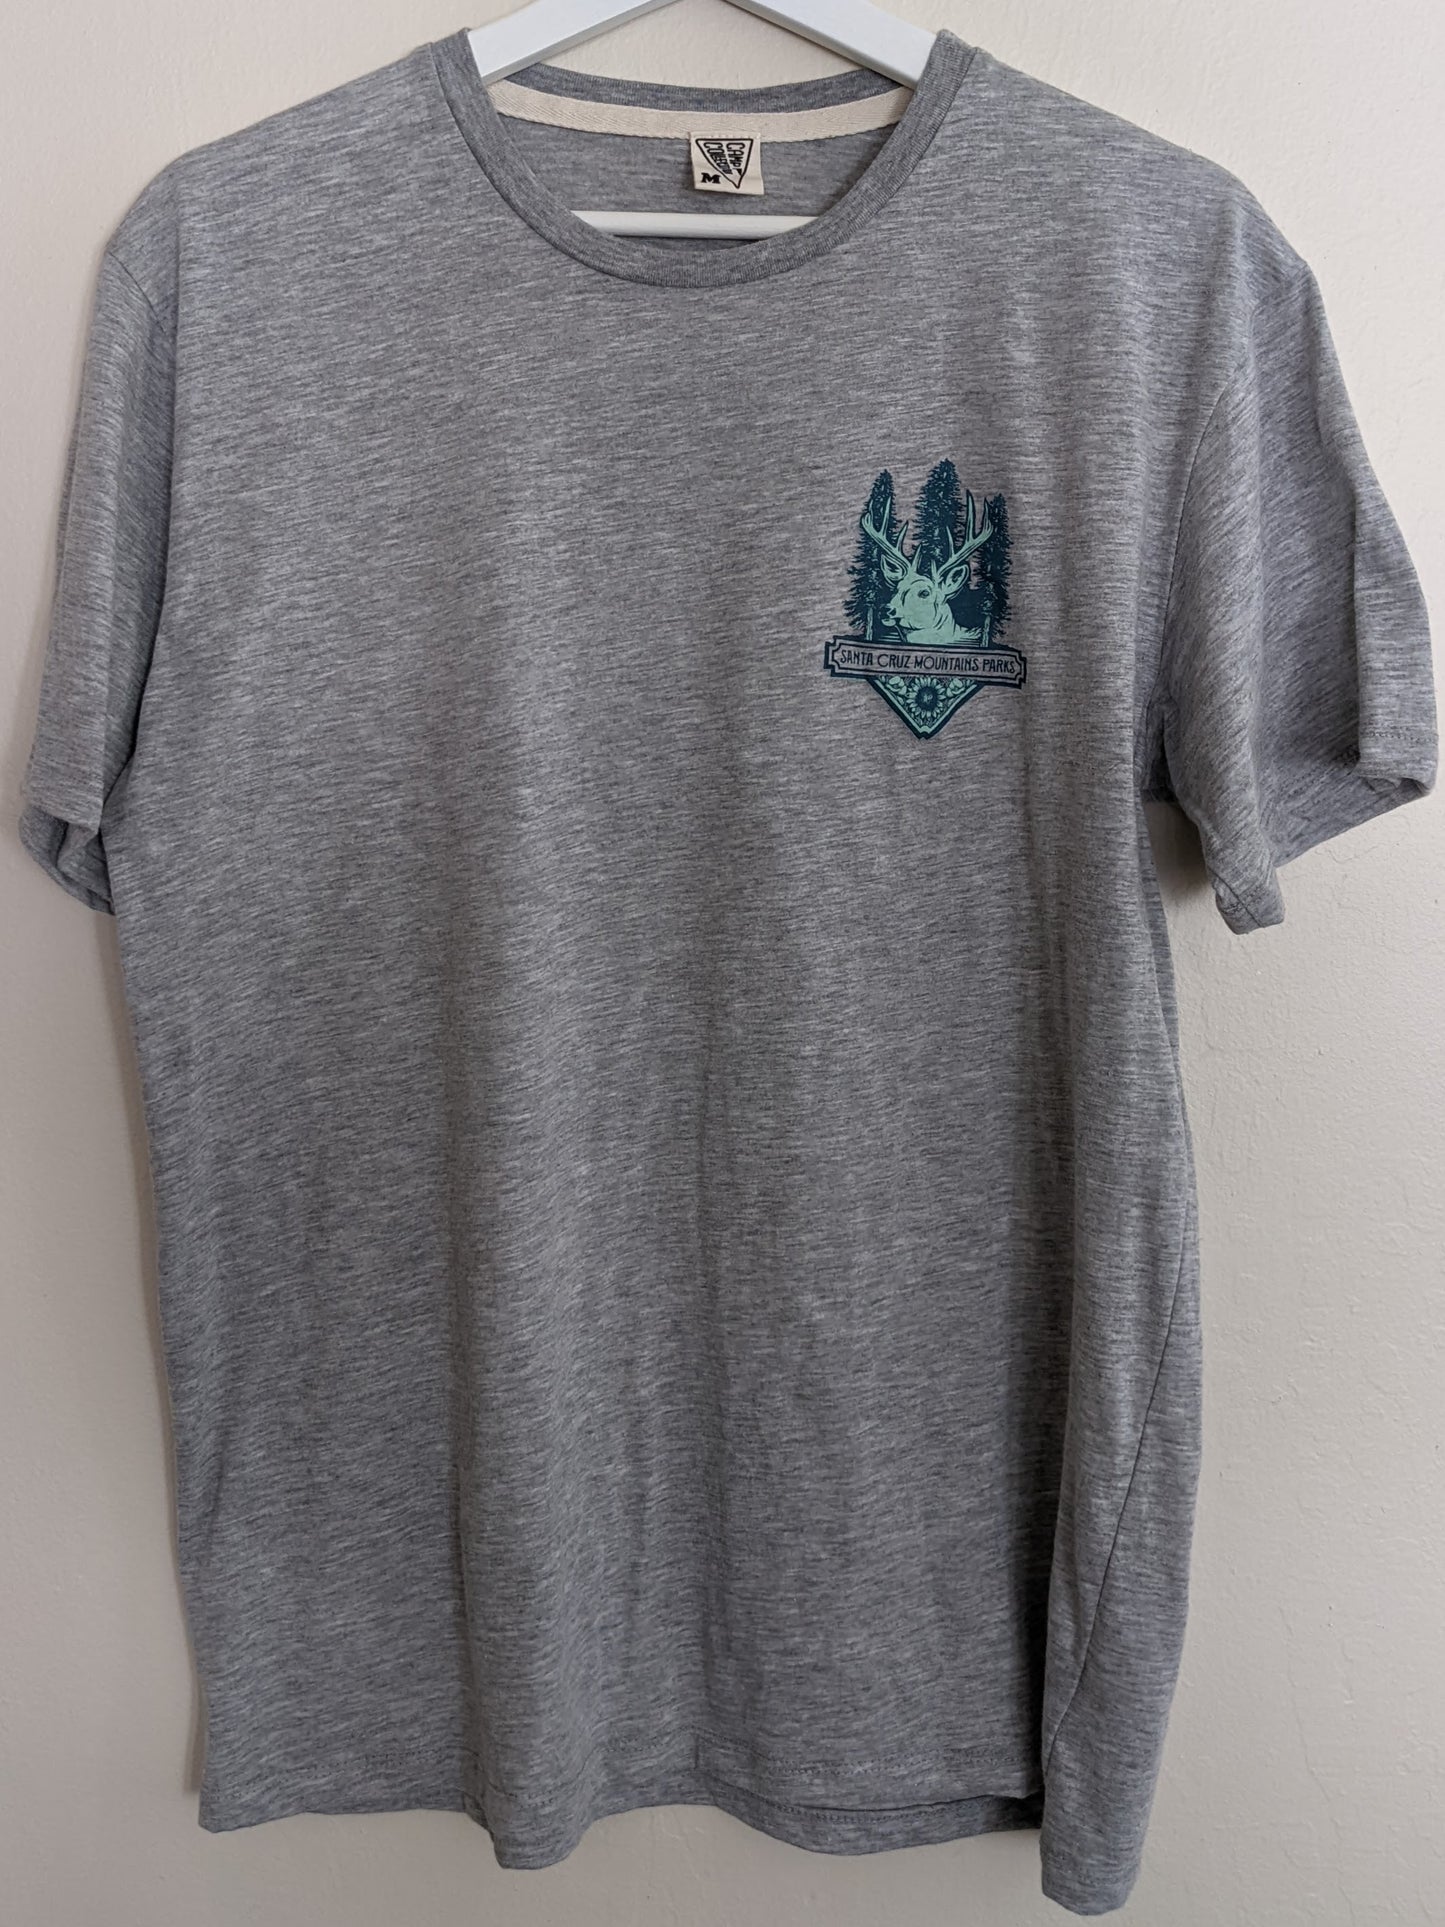 Gray Camp Collection shirt with Santa Cruz Mountains Parks design by Nicky Gatson,  created by Jackie from Present